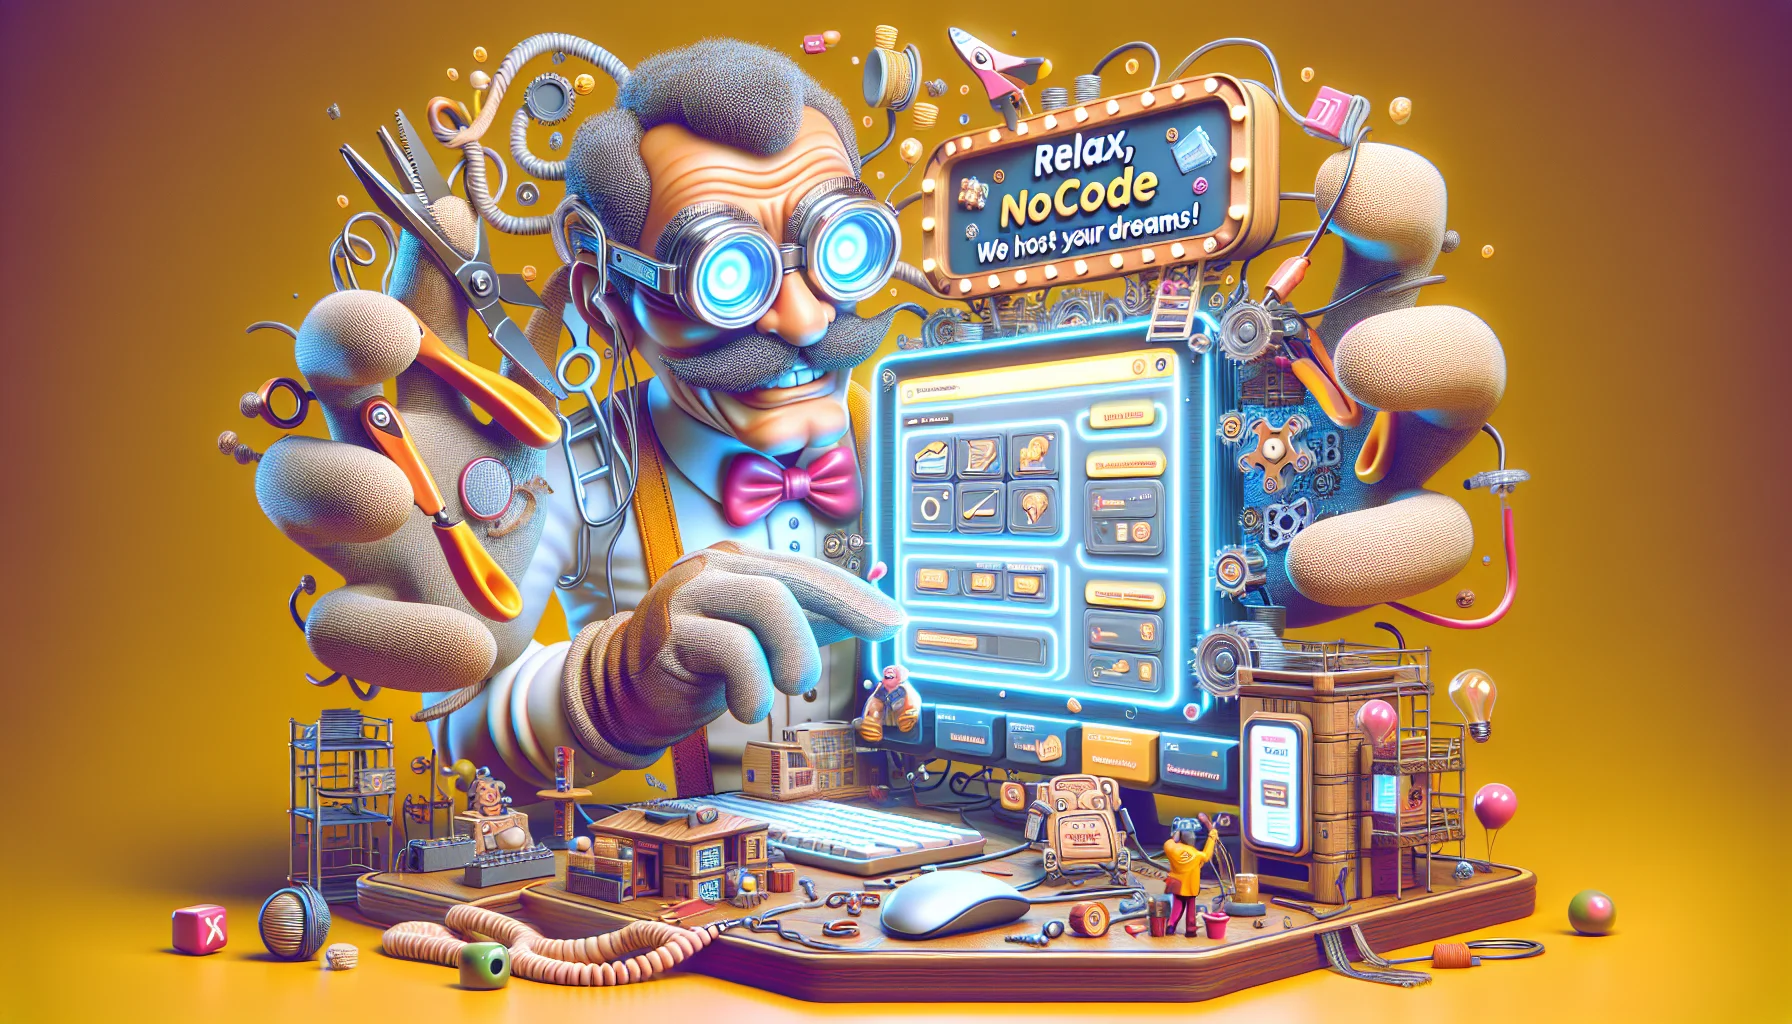 Craft a humorous and highly detailed scene depicting an imaginary nocode website builder. The builder could appear as a quirky, whimsical character with giant glasses, large rubber gloves, and armed with tools such as a giant mouse and keyboard. This character is working on an exaggerated glowing screen displaying components of a website, humorously assembling it with a sense of charm and efficiency. The background includes a playful banner alluding to the concept of web hosting. It might say something like 'Relax, we host your dreams!', sparking laughter and interest.